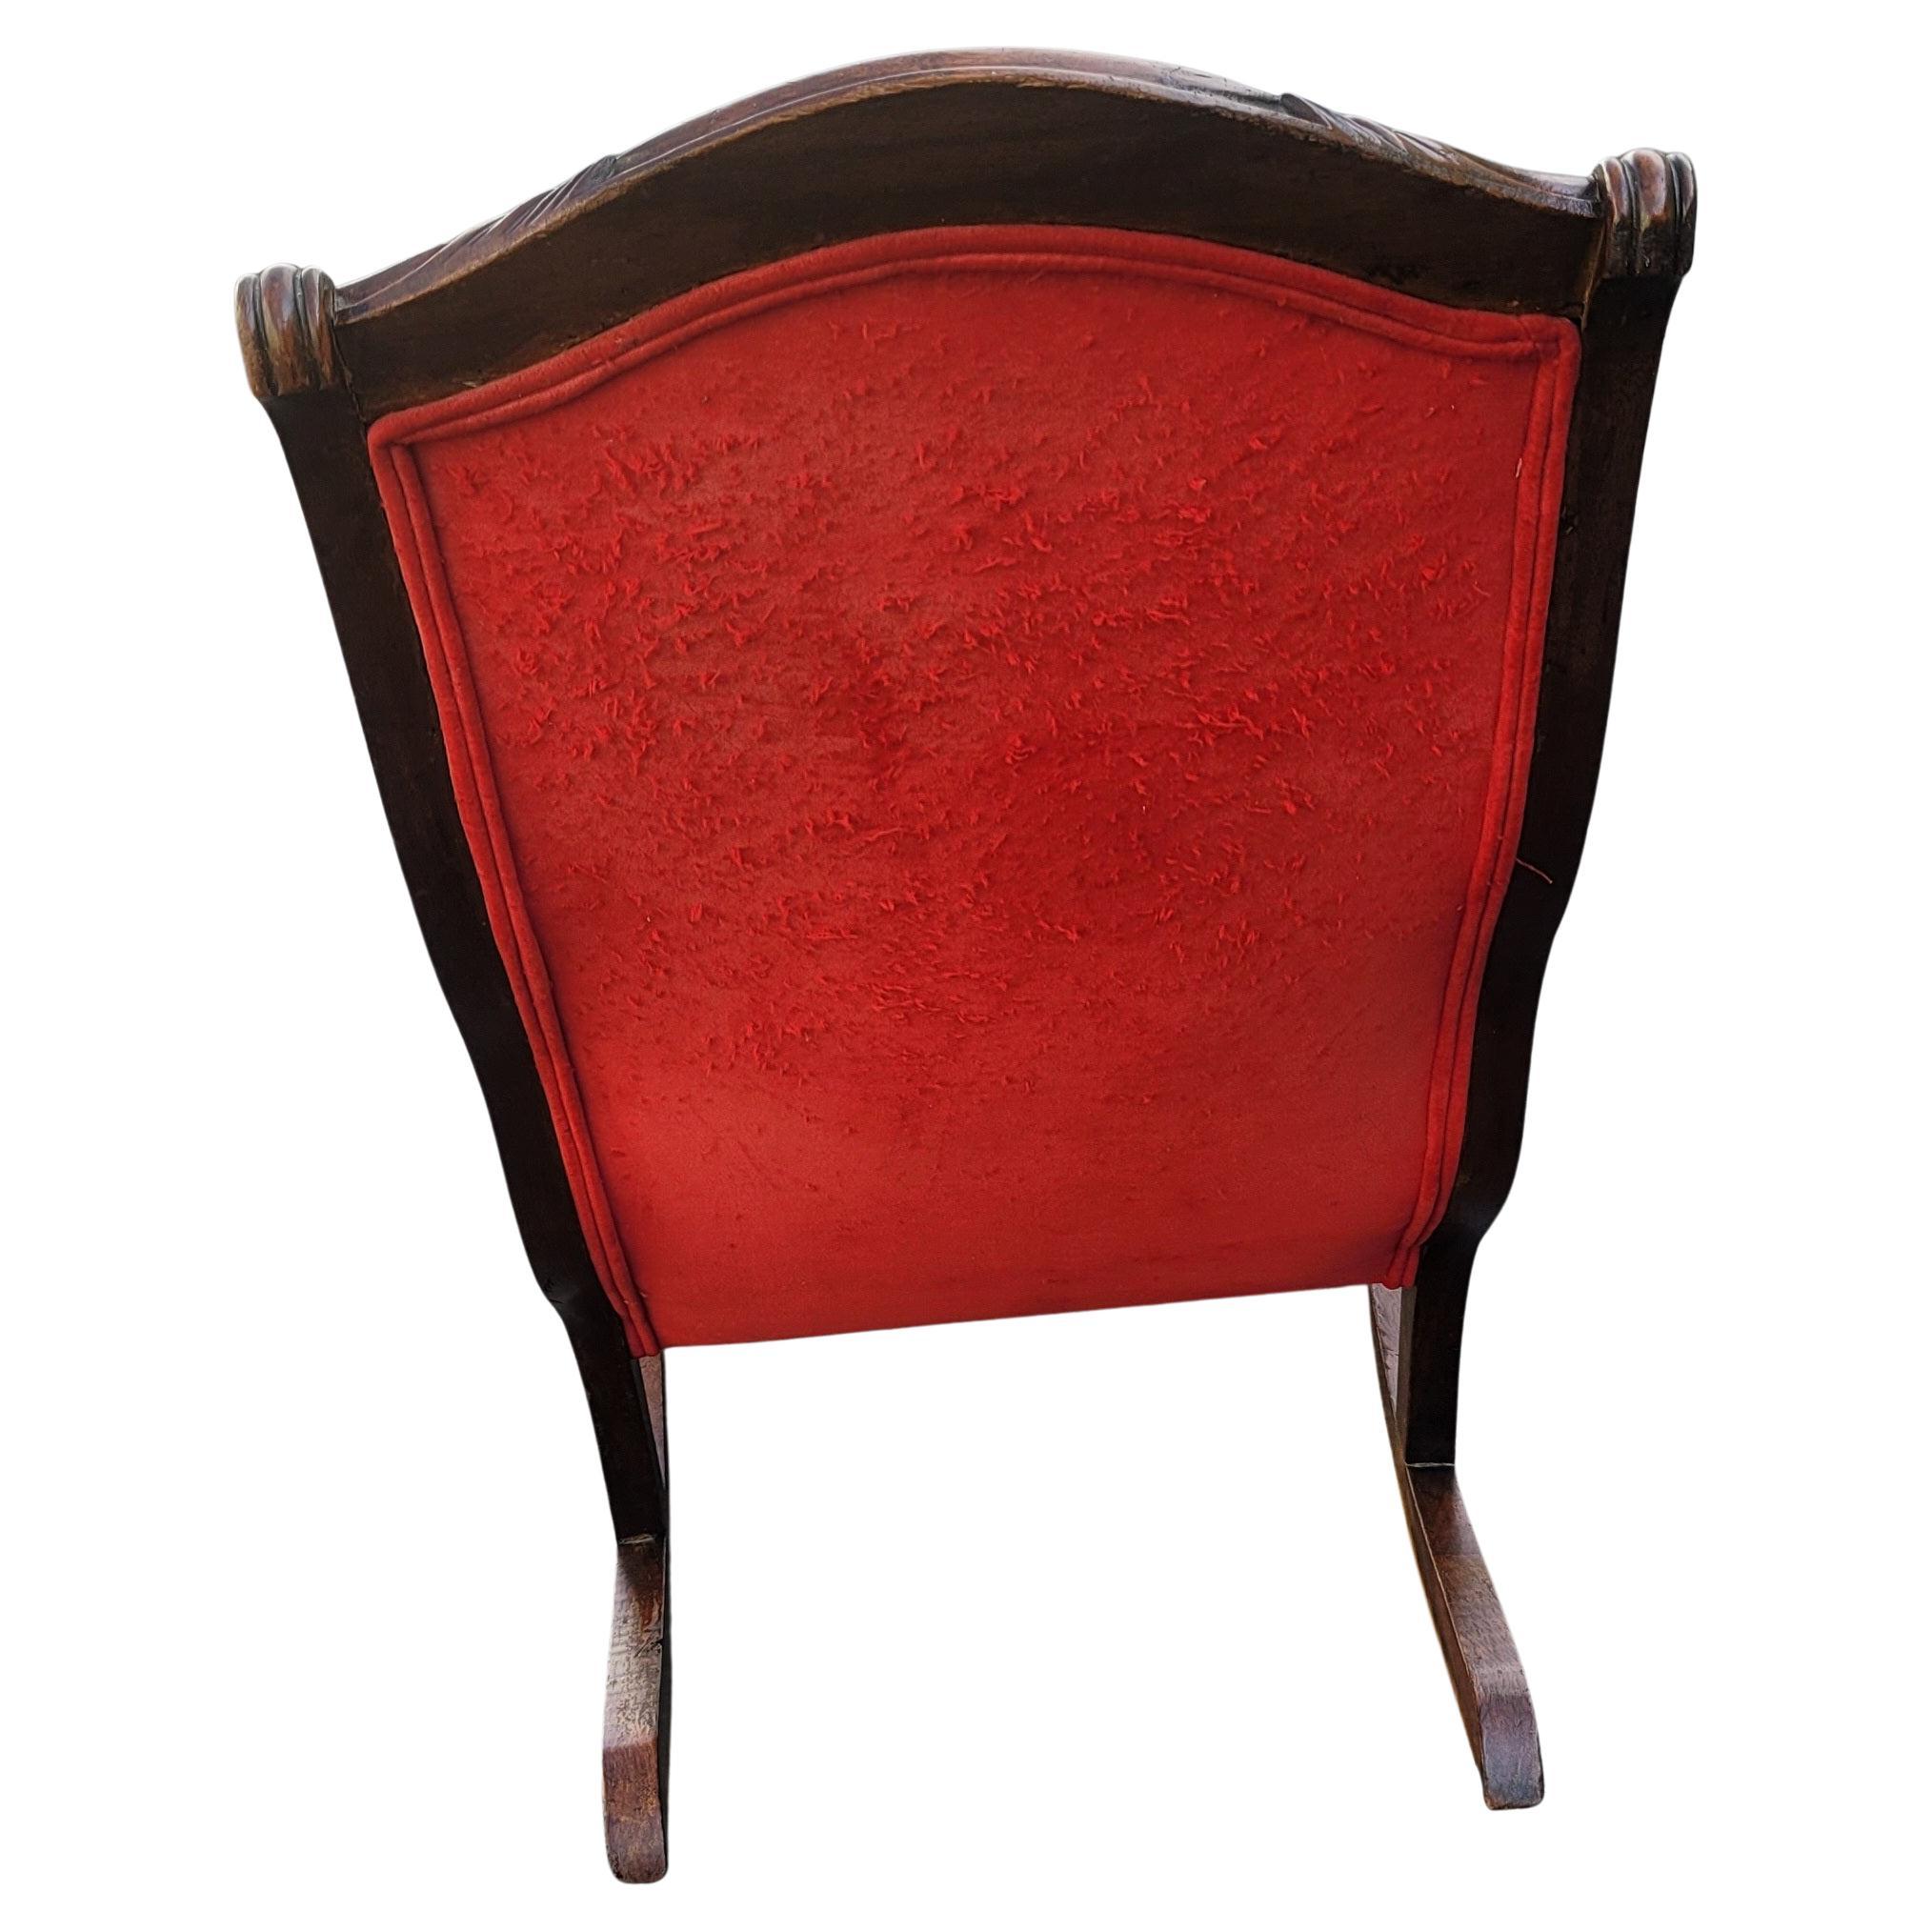 Late Victorian Victorian Mahogany and Tufted Velvet Upholstered Rocking Chair, Circa 1920s For Sale